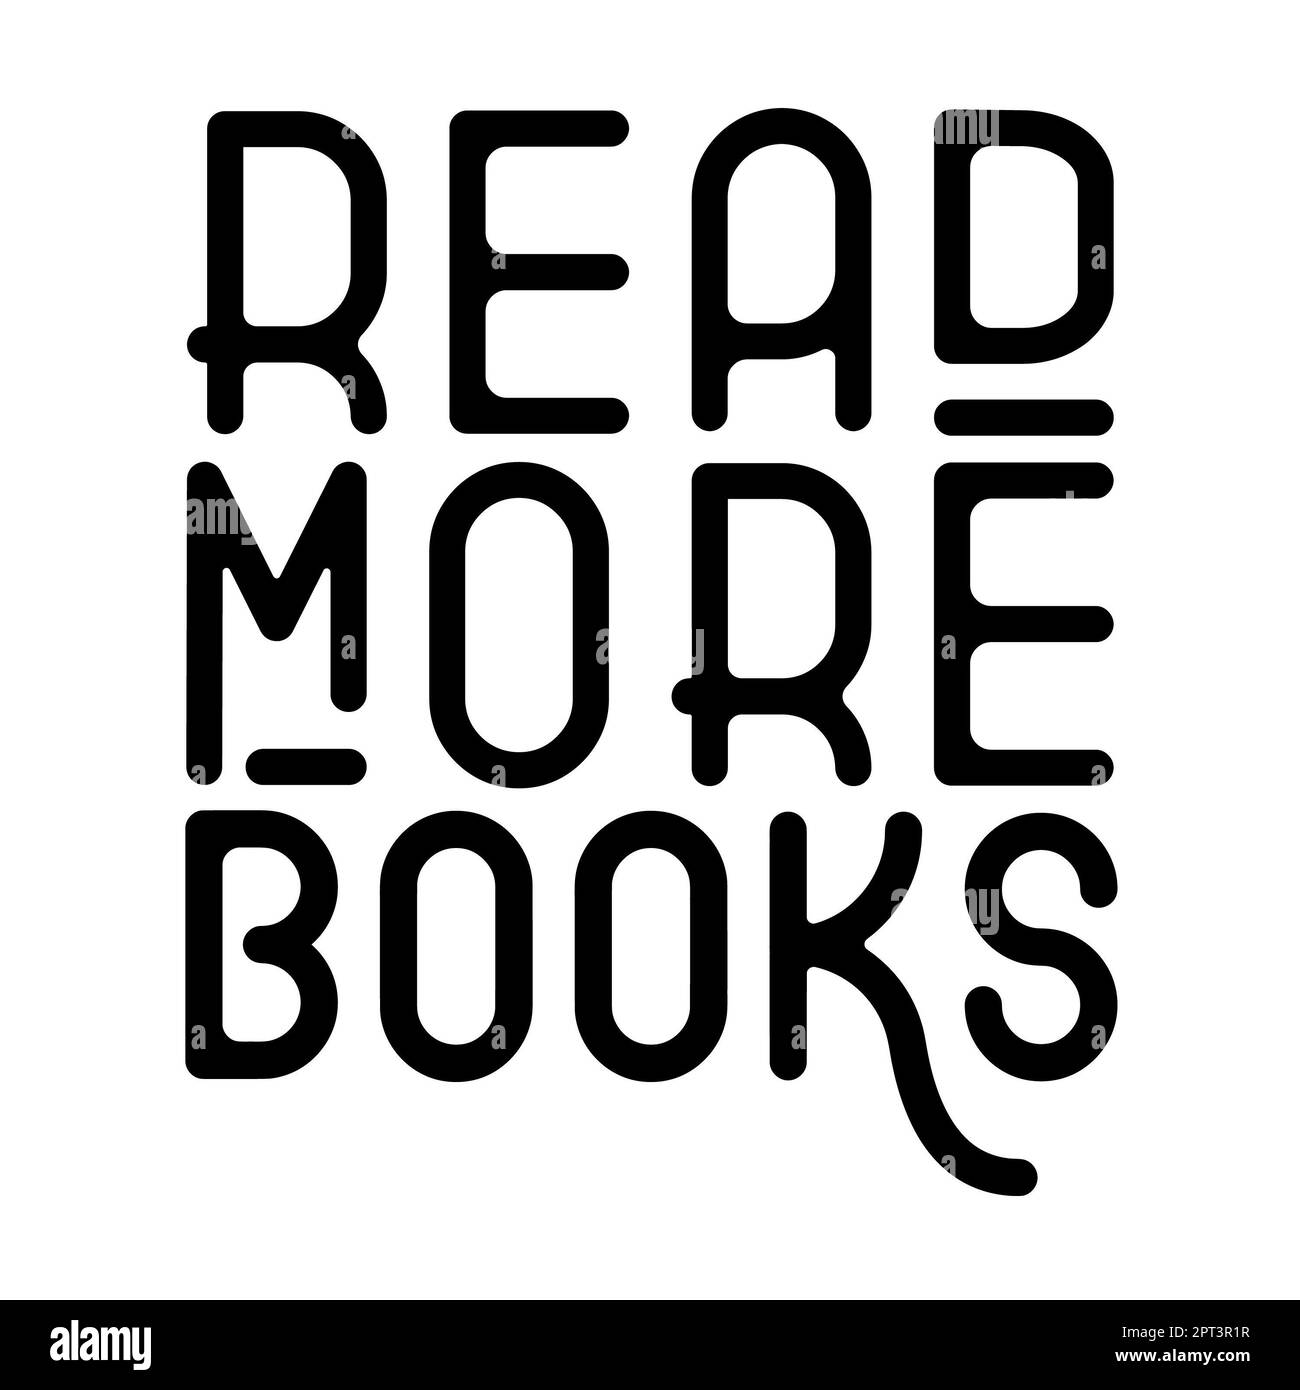 Read more books typography graphic design on white background, book illustration, Conceptual phrase for shirt or poster, black words lettering, librar Stock Photo